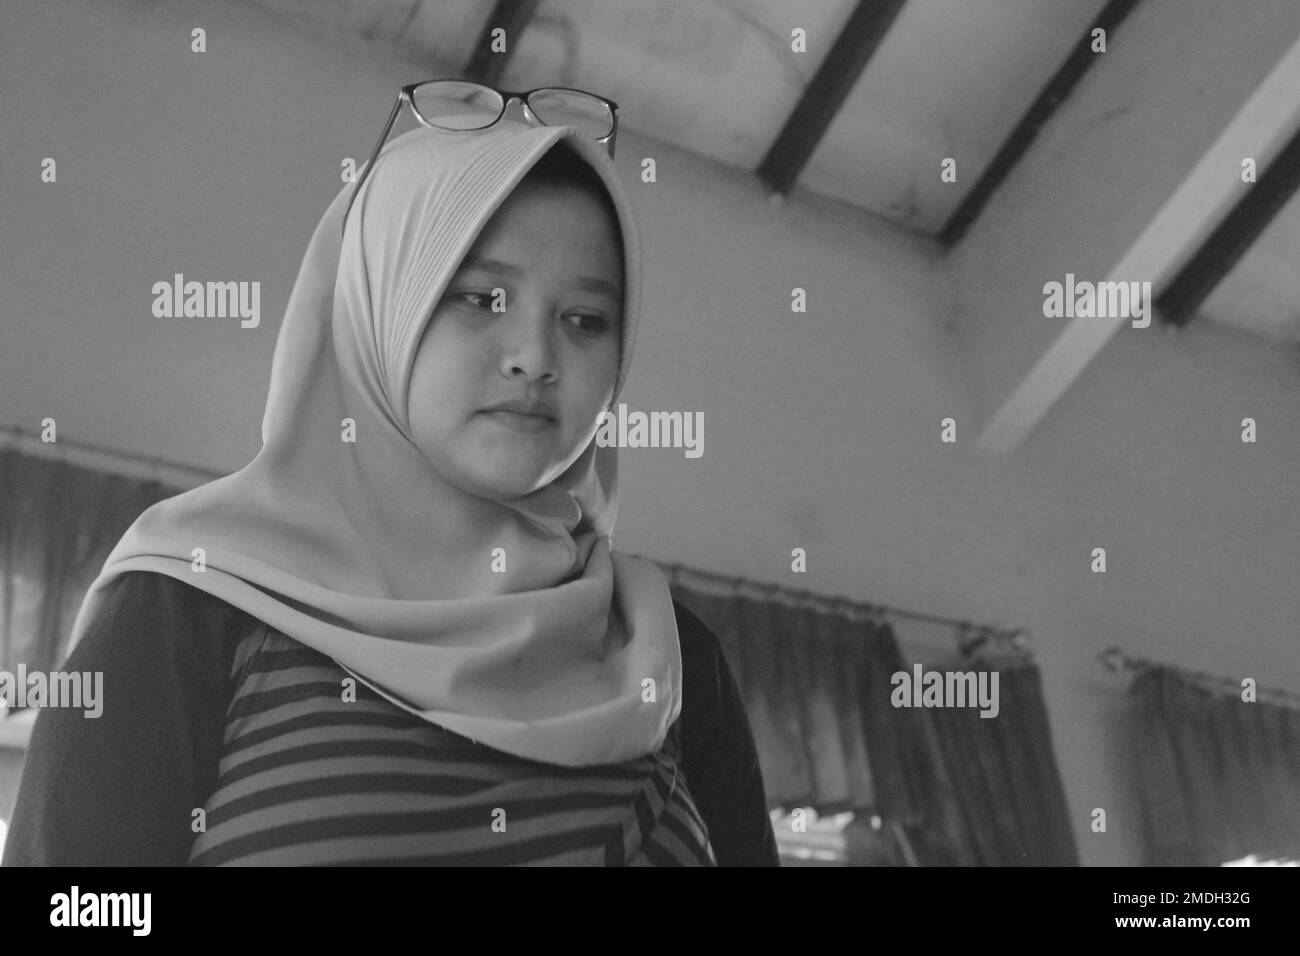 Jakarta, Indonesia - 02 24 2020: black and white photo of a woman wearing a hijab wearing glasses over her head during a college vacation Stock Photo